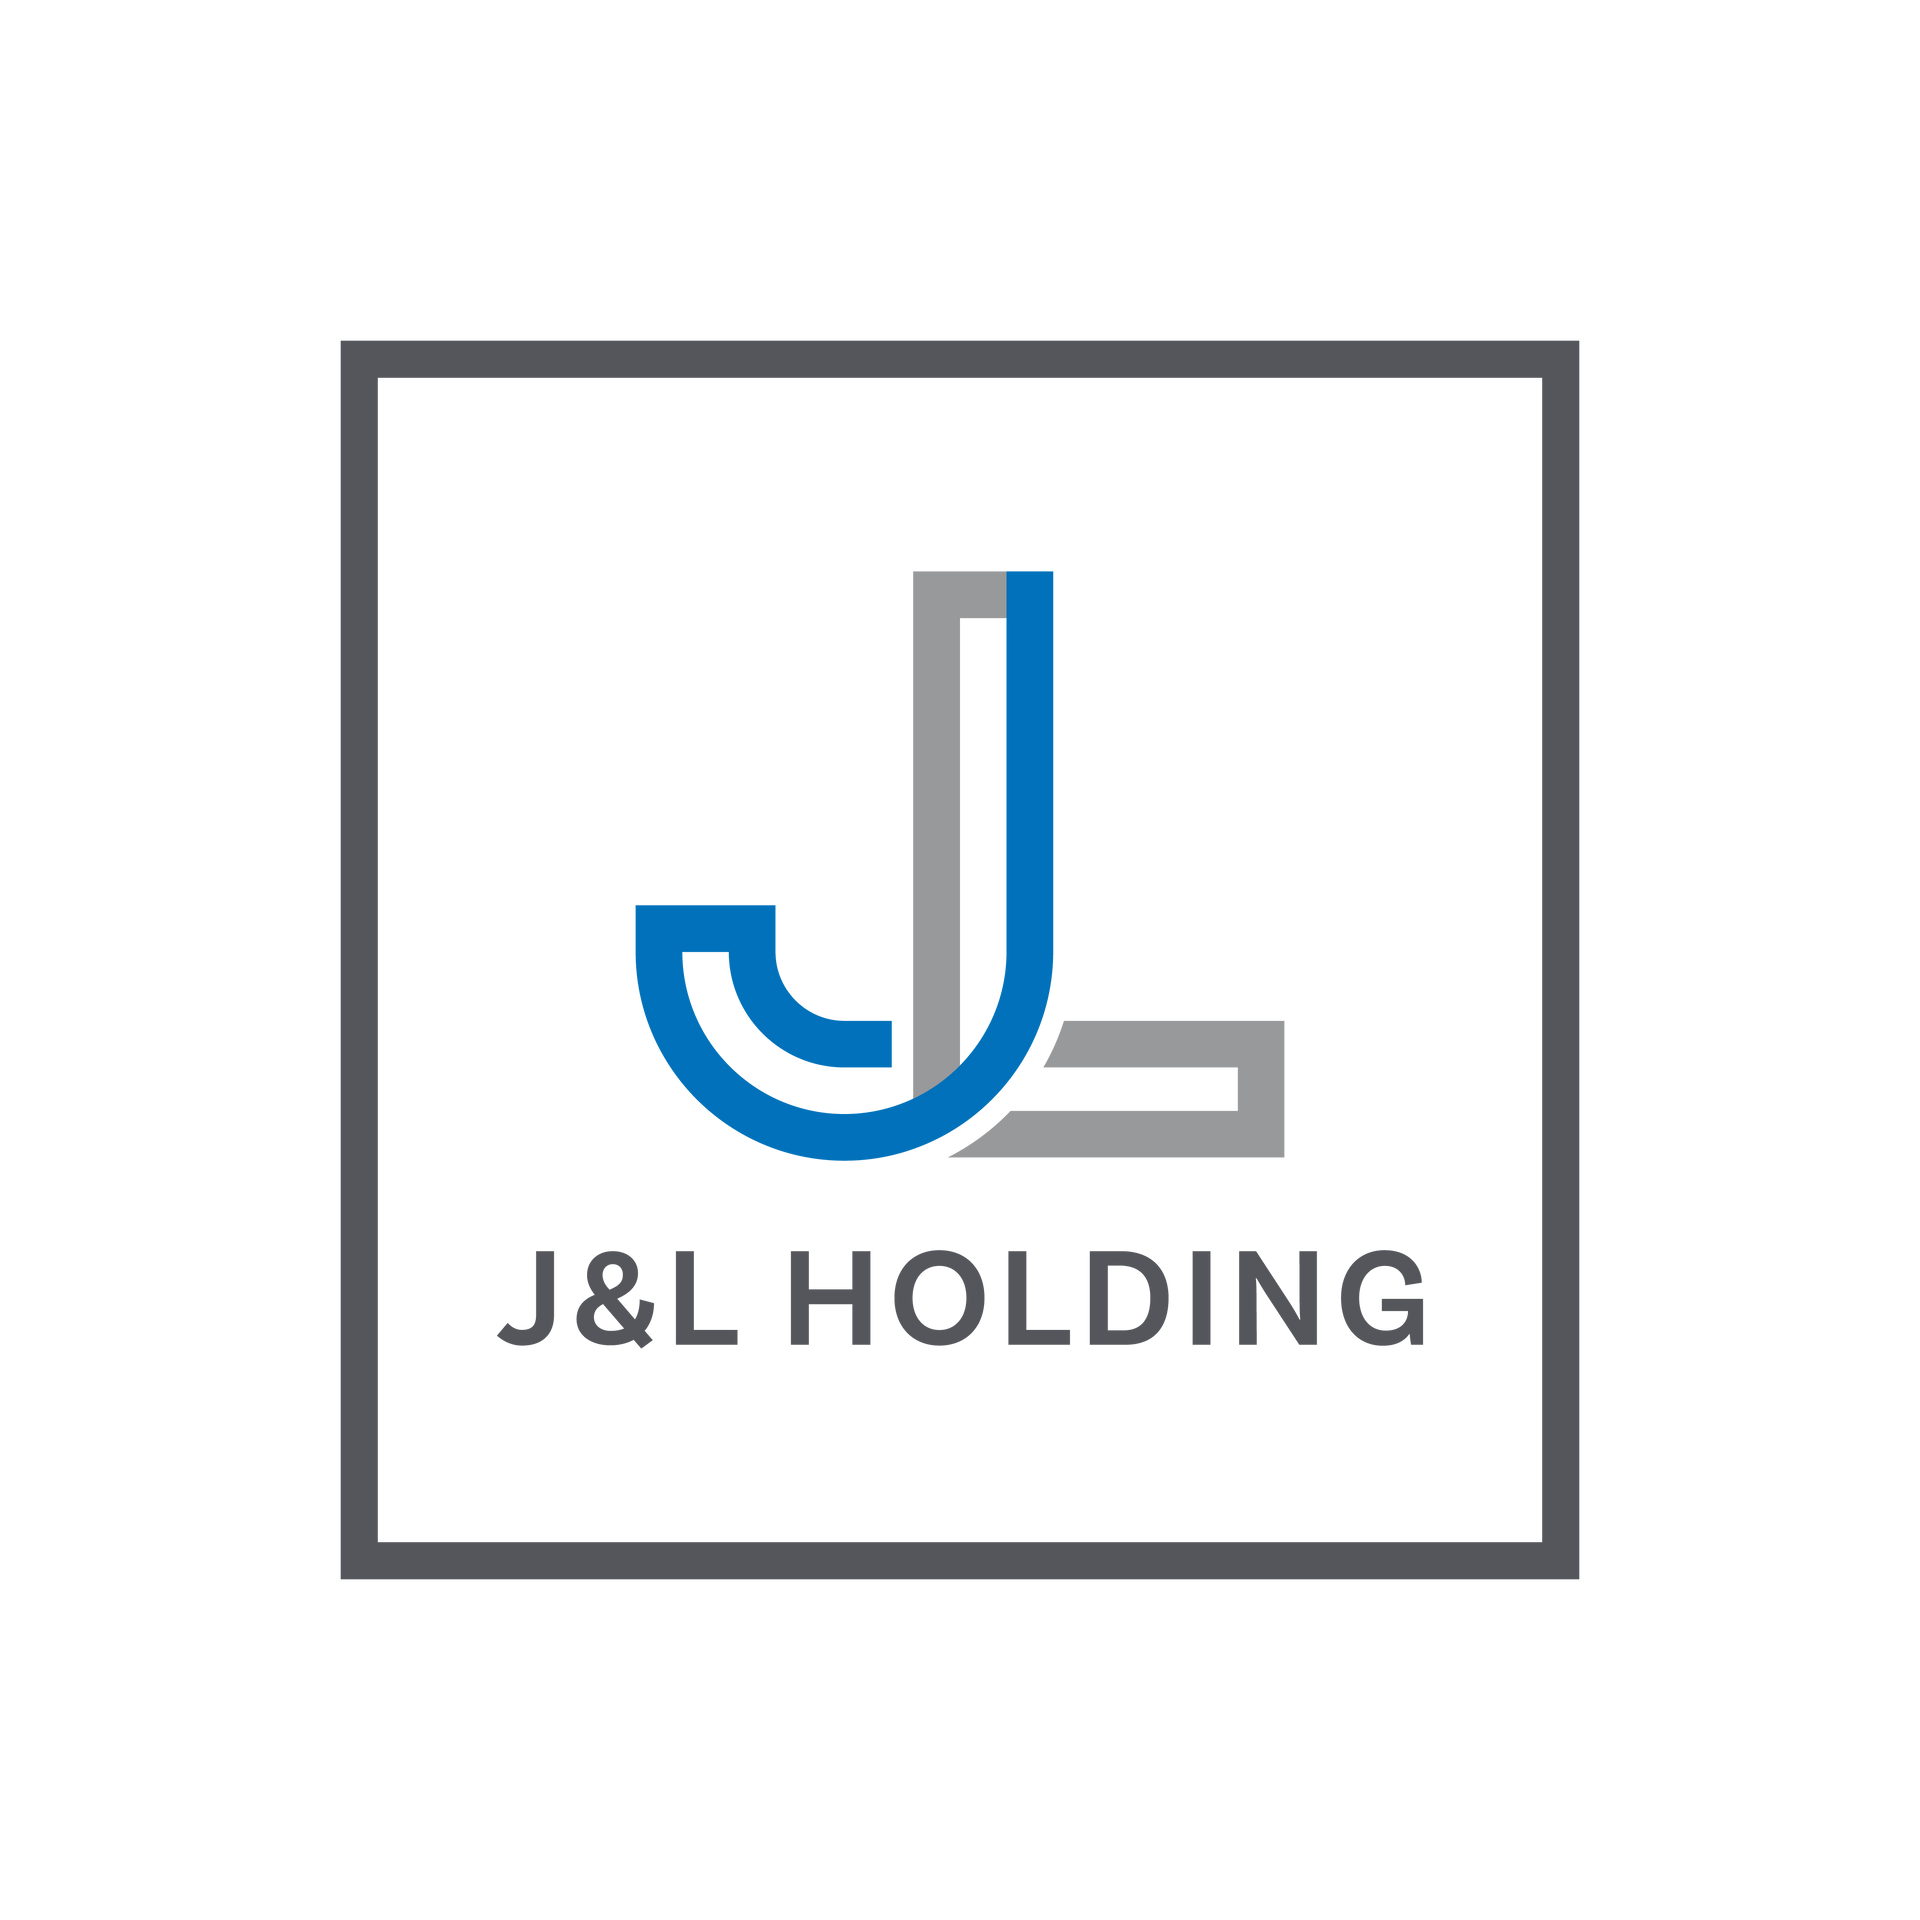 J&L Holding Footer Logo - Select To Go Home